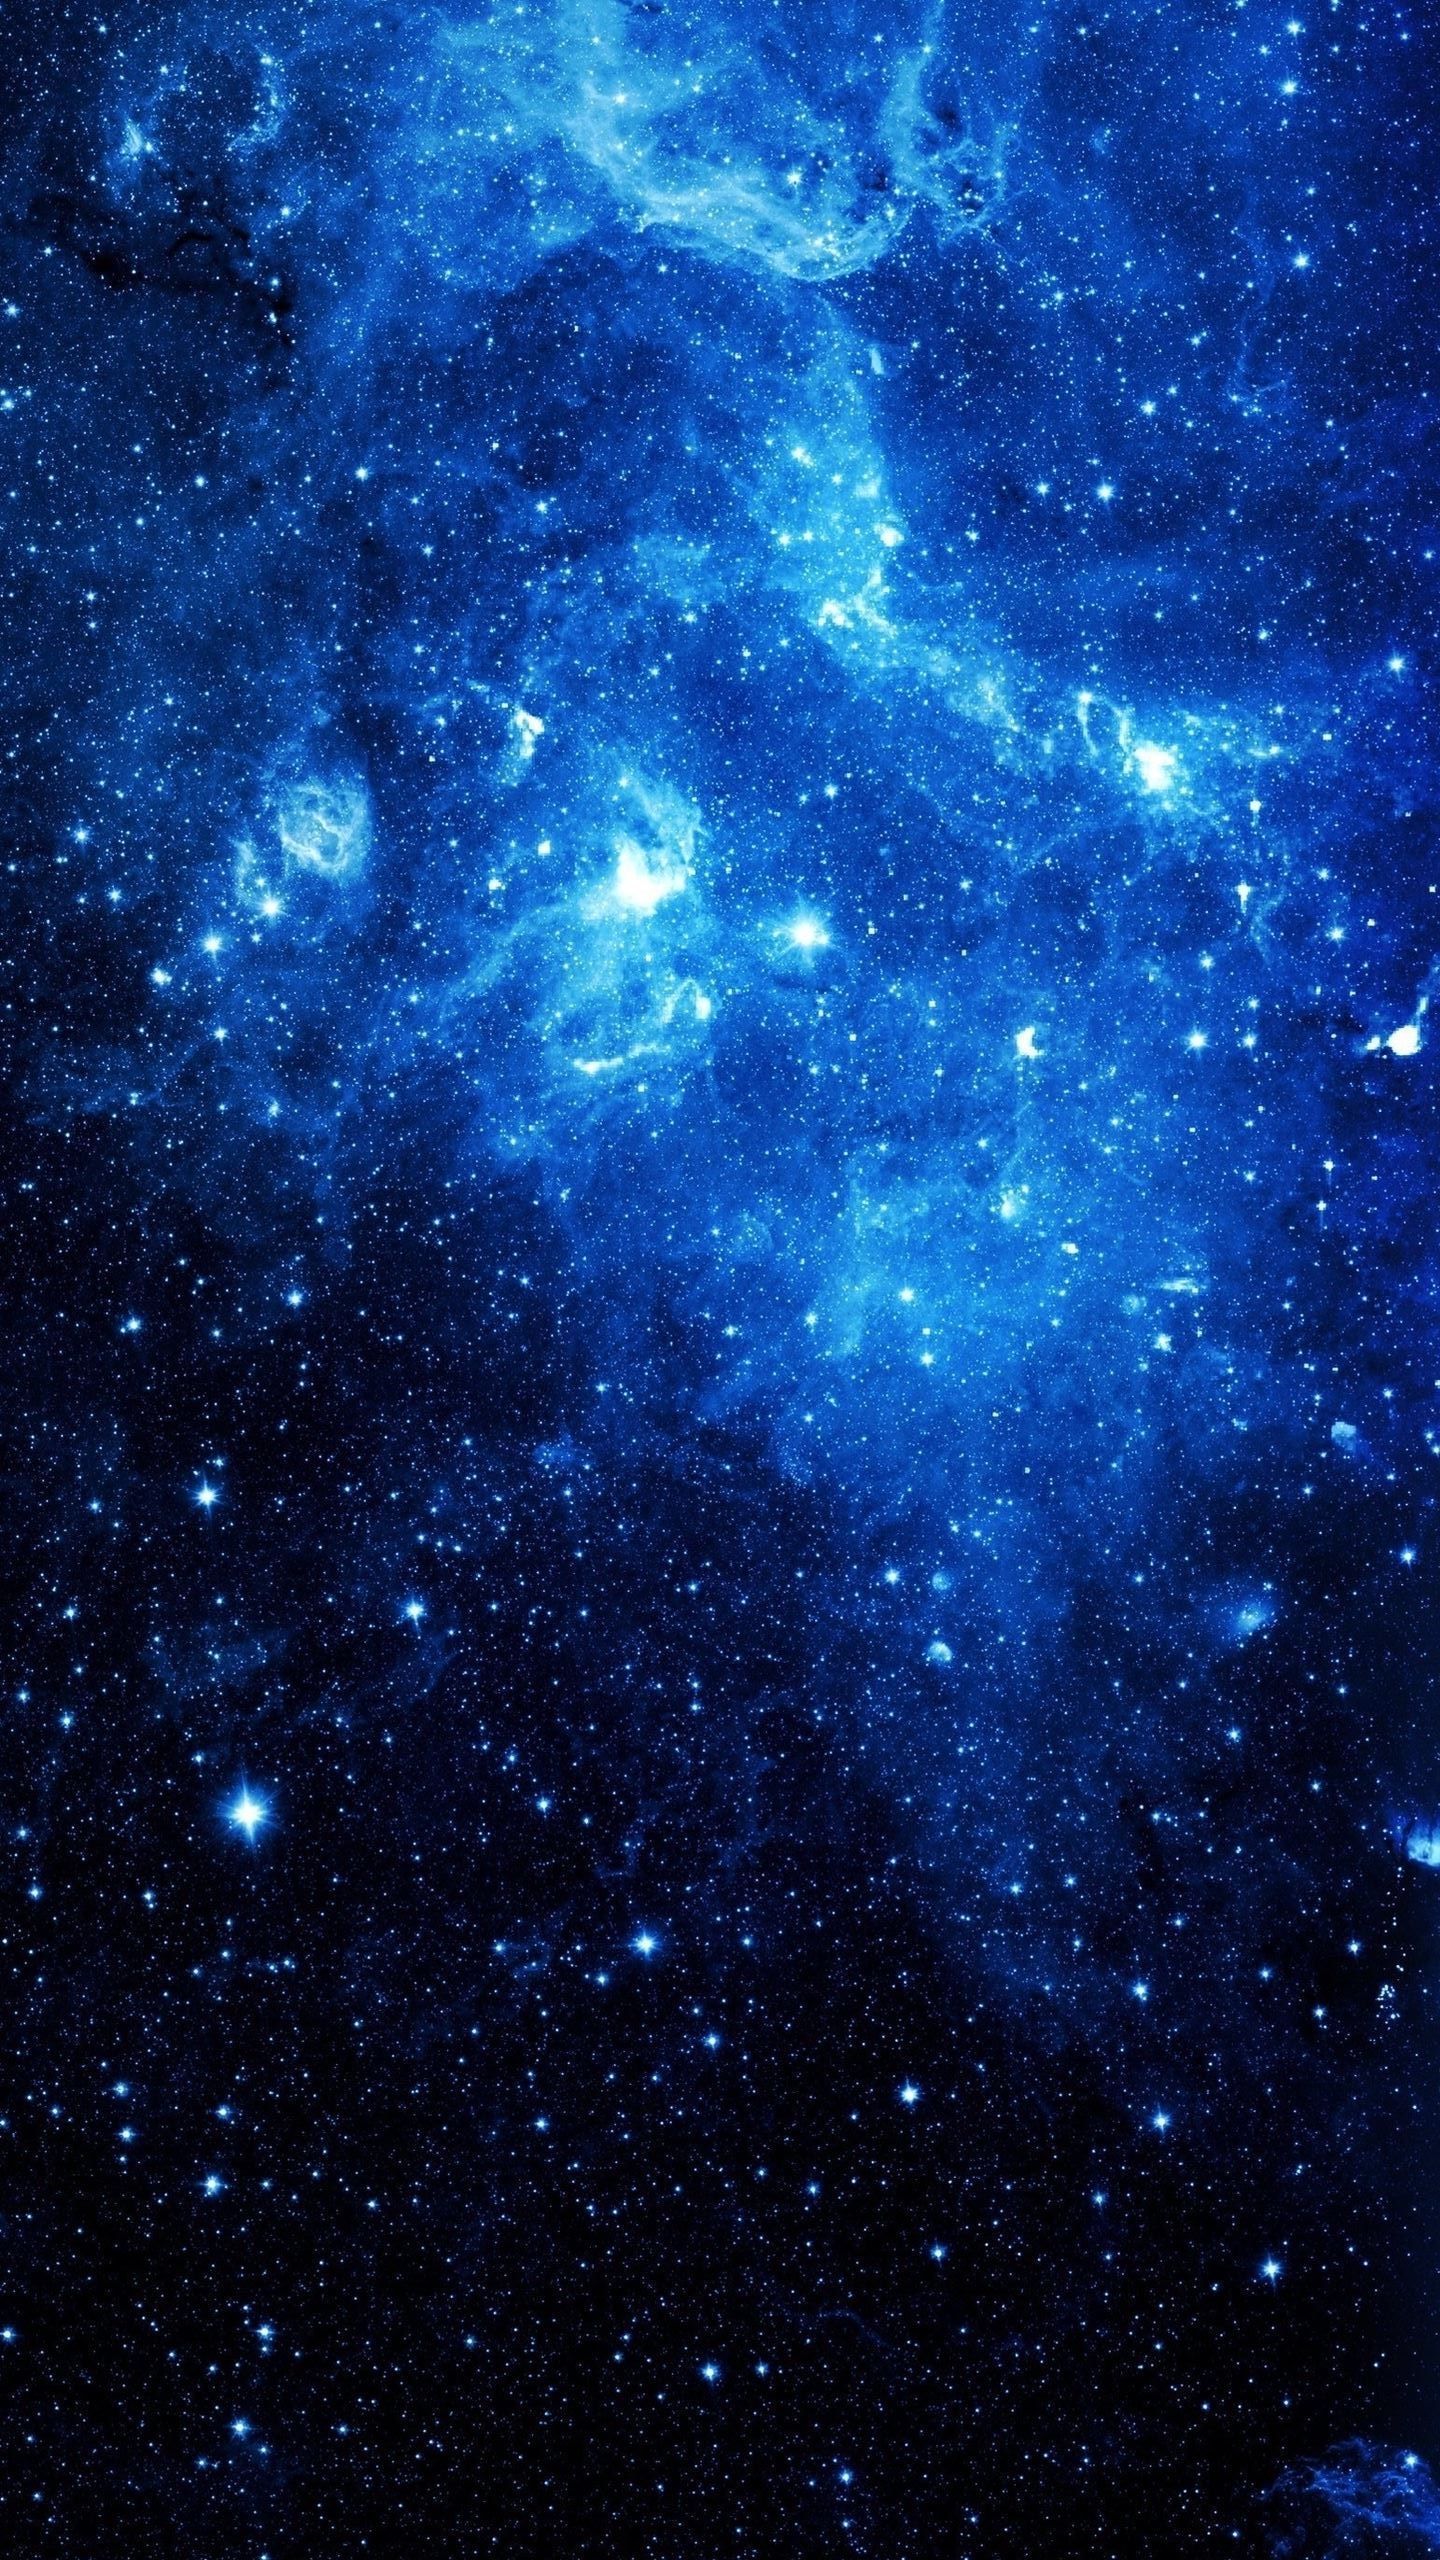 Skybackground 2020 01 08 2856 In 2020. Blue Sky Wallpaper, Blue Wallpaper Iphone, Galaxy Background